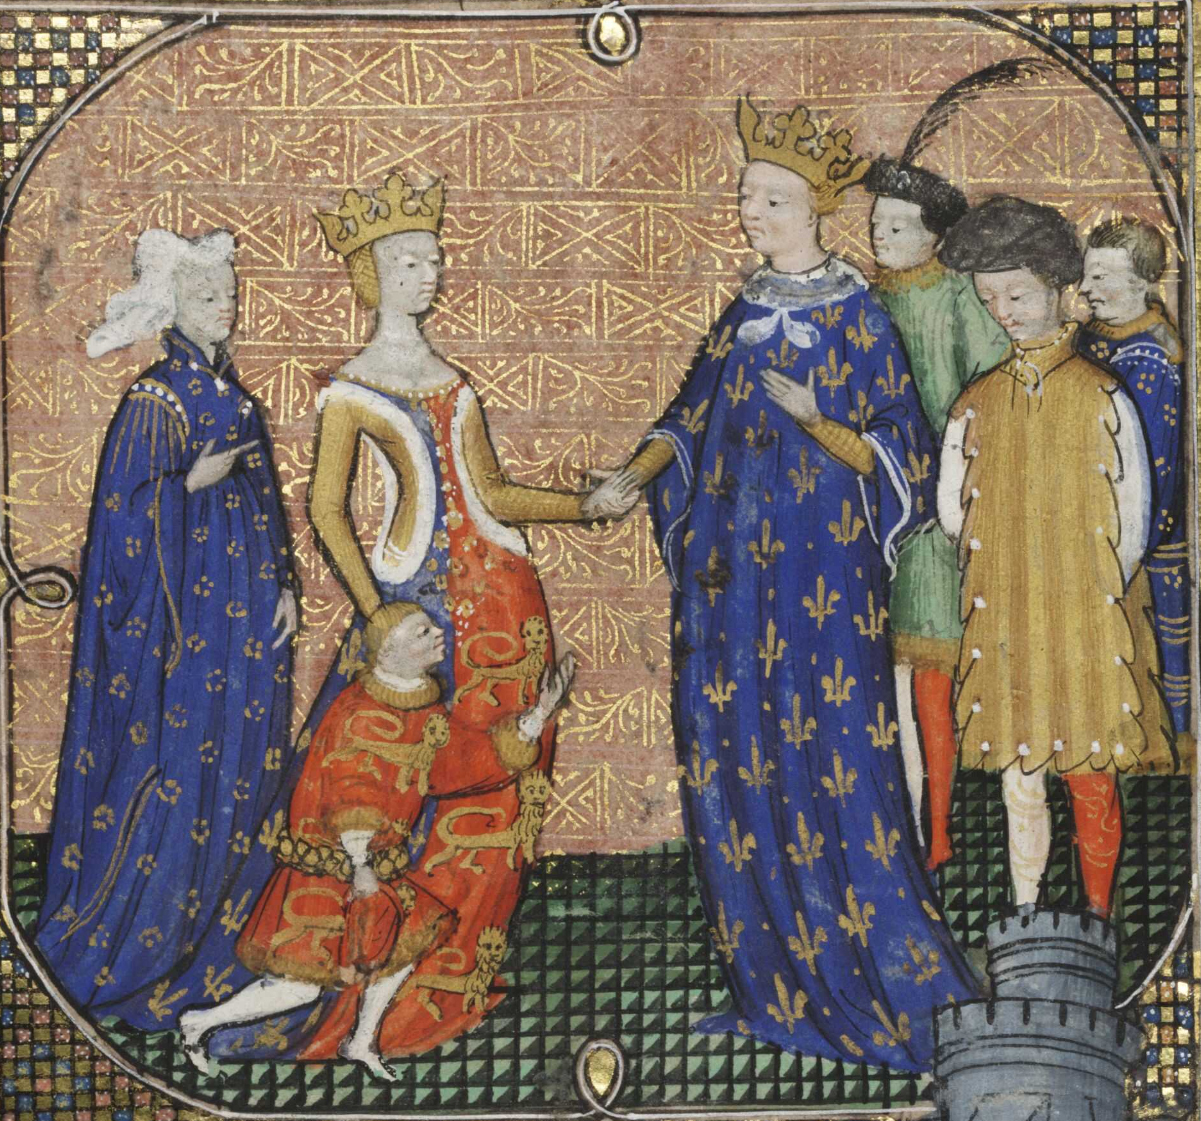 A near-contemporary miniature showing the future Edward III giving homage to Charles IV of France under the guidance of Edward's mother, and Charles' sister, Isabella, in 1325[66]